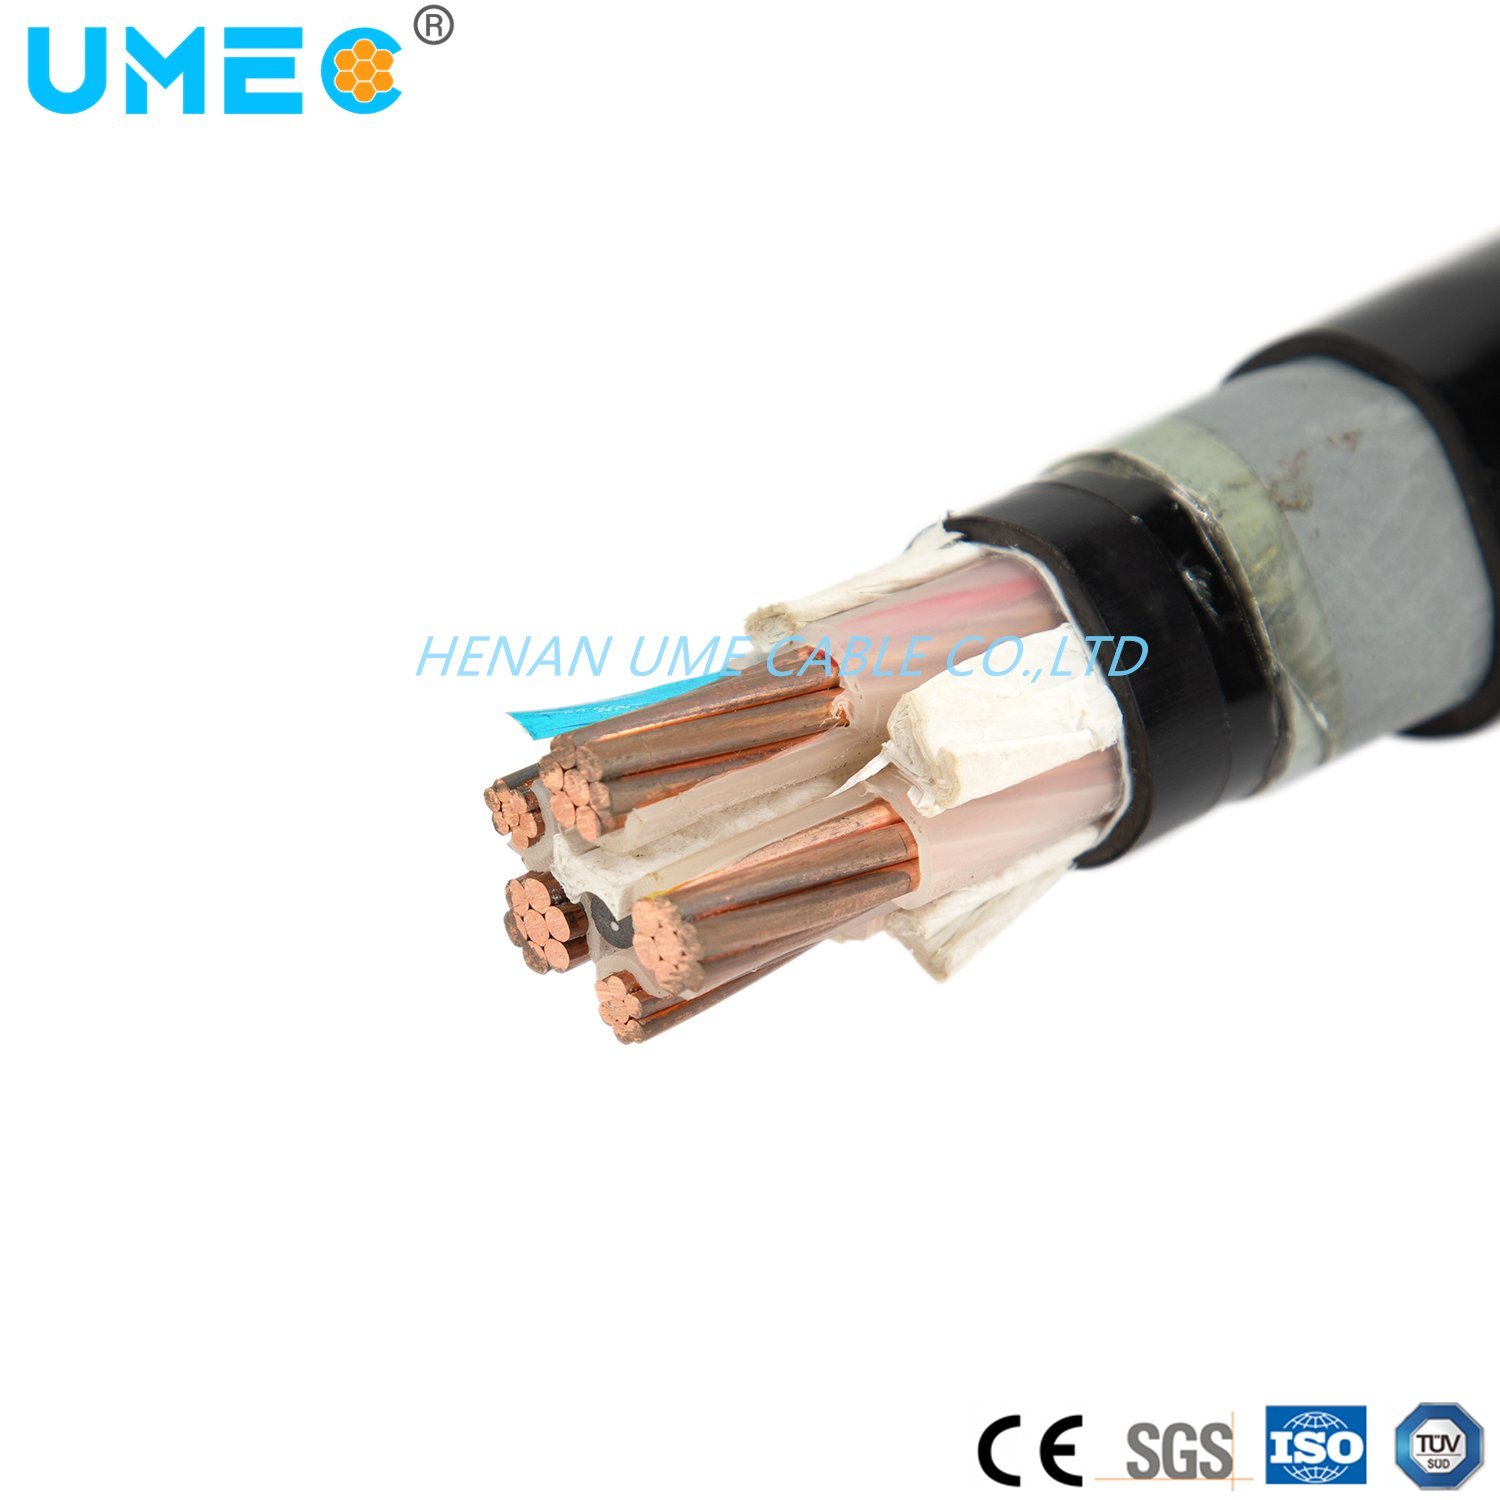 Electric Power Cable CE Standard Nyy Nayy Na2xy N2xy N2xry VV32 Nh-Yjv42 Cable Wire